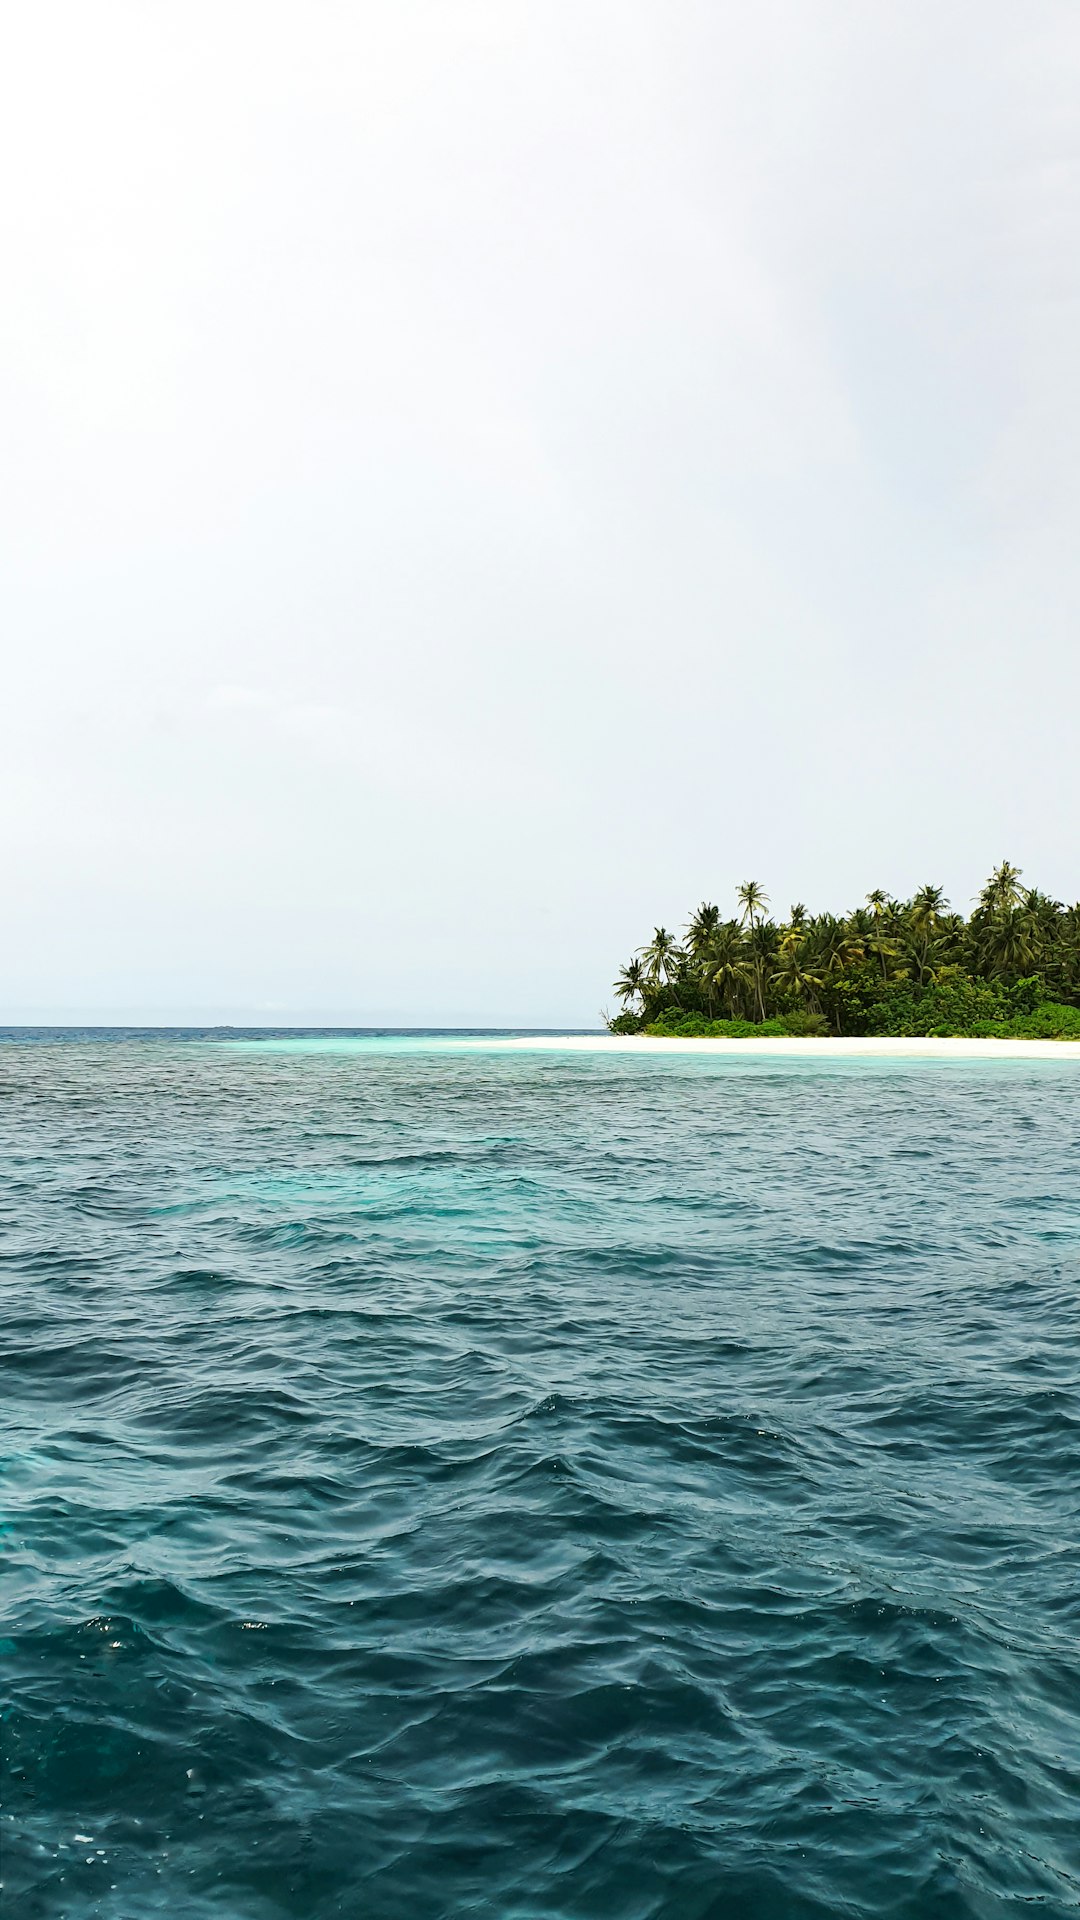 travelers stories about Natural landscape in Raa Atoll, Maldives